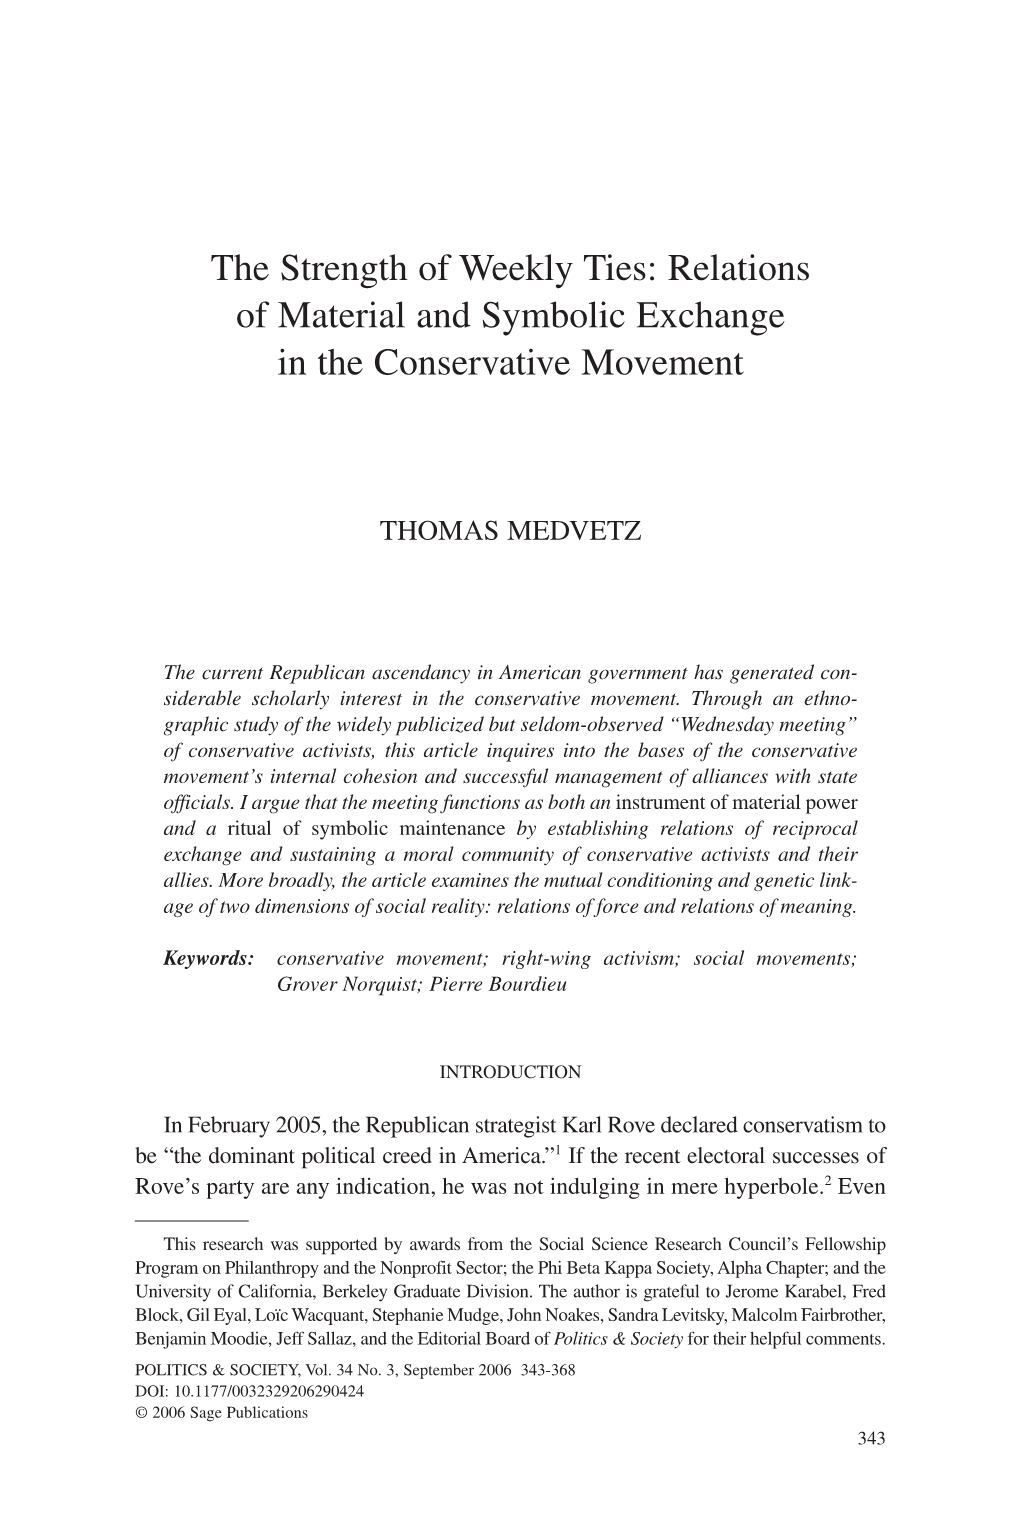 The Strength of Weekly Ties: Relations of Material and Symbolic Exchange in the Conservative Movement